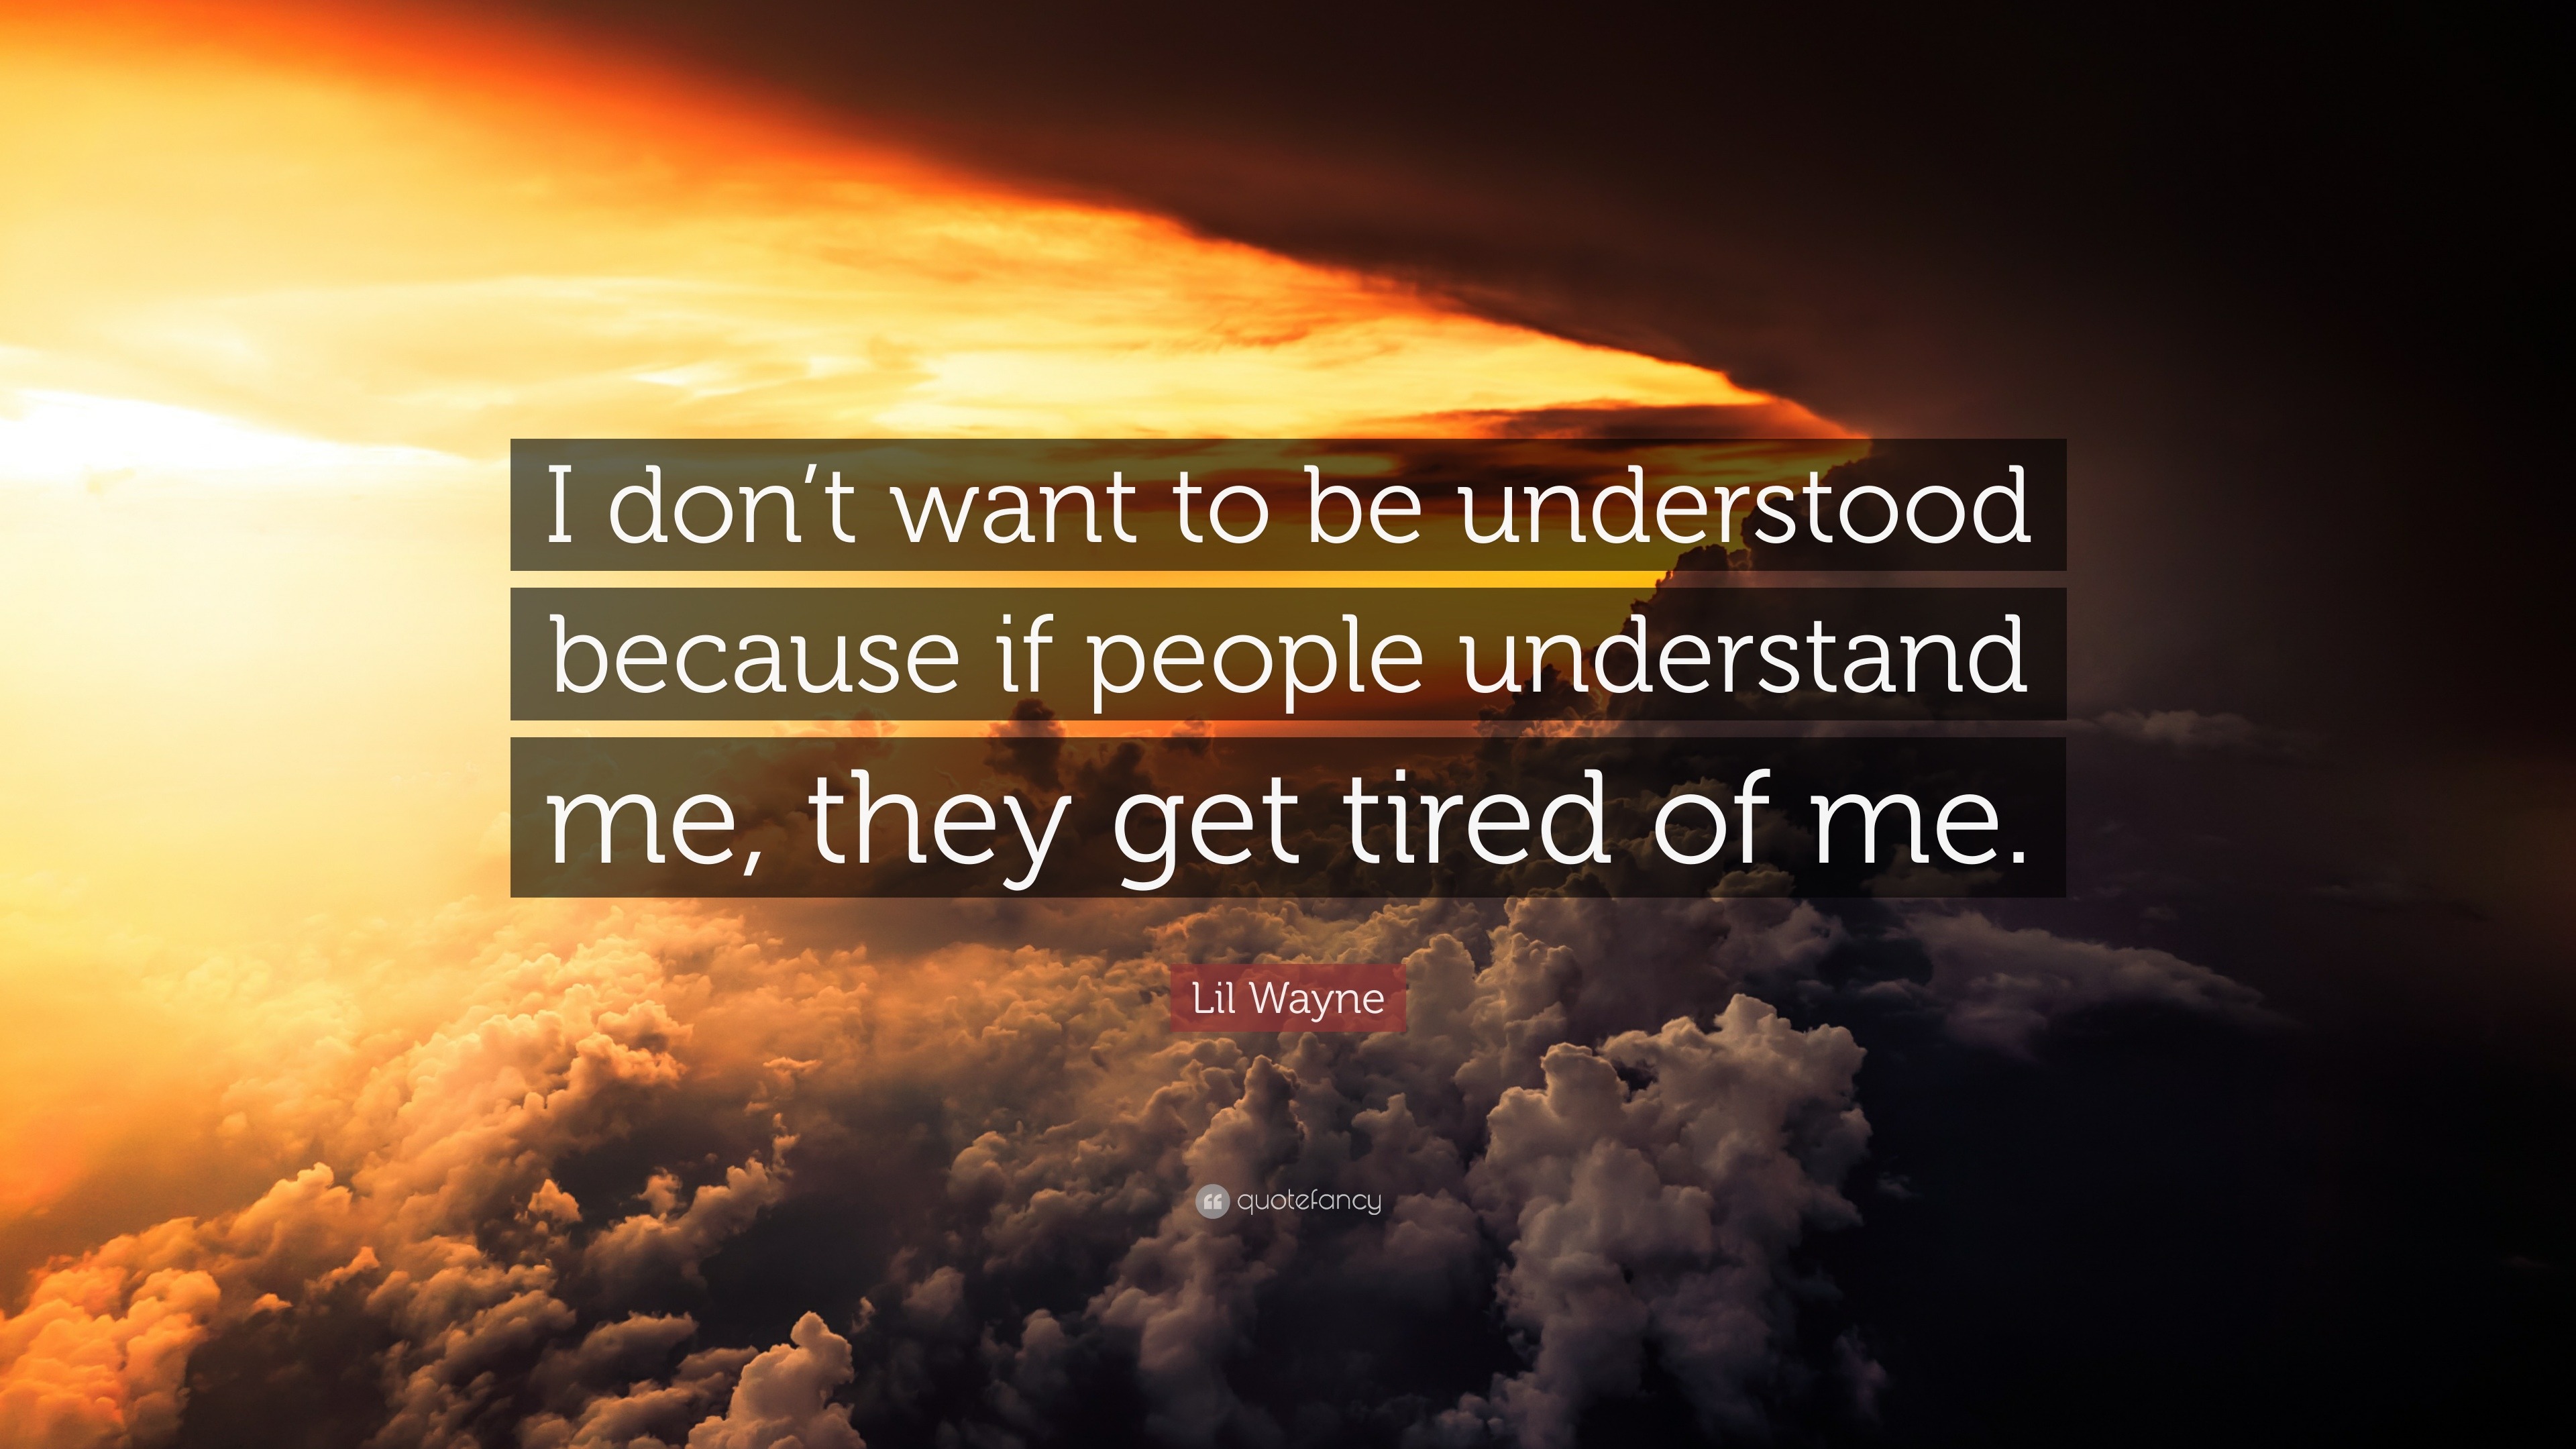 Lil Wayne Quote “I don t want to be understood because if people